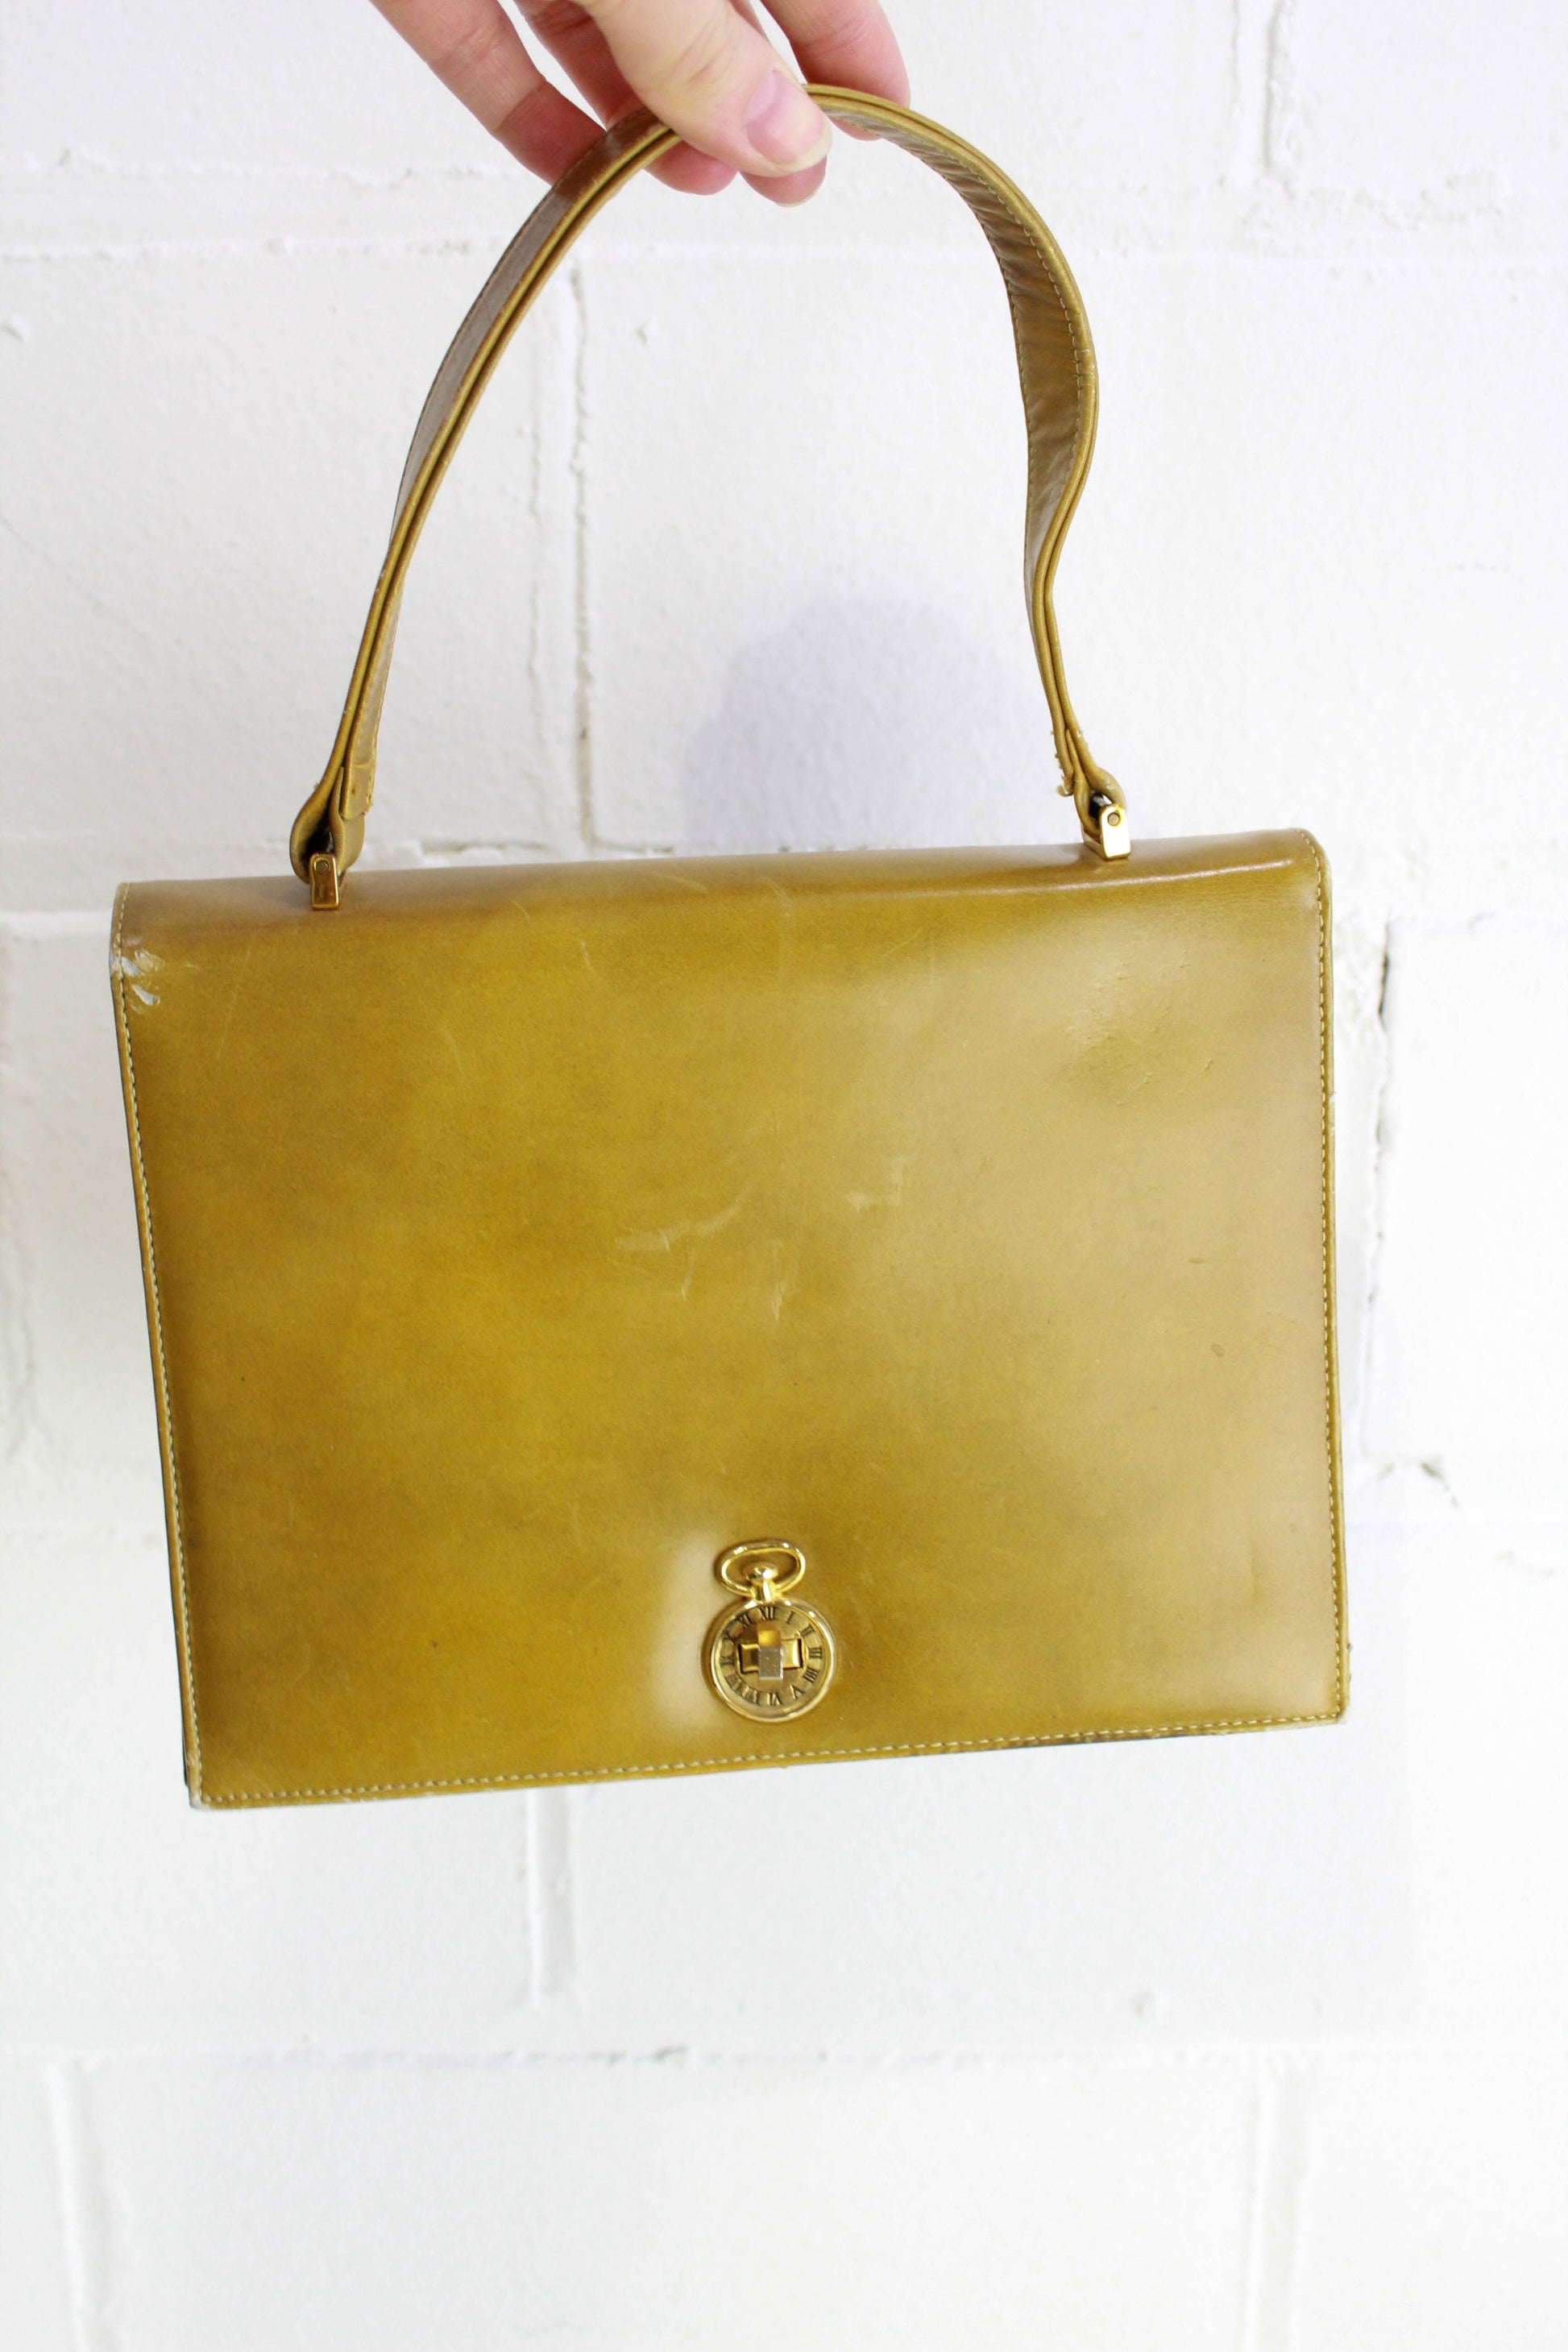 Vintage 1950s Gold Clasp Edwards Bags Ltd. Convertible Gold & Black Evening Purse, Mid-Century 2 in 1 Bag